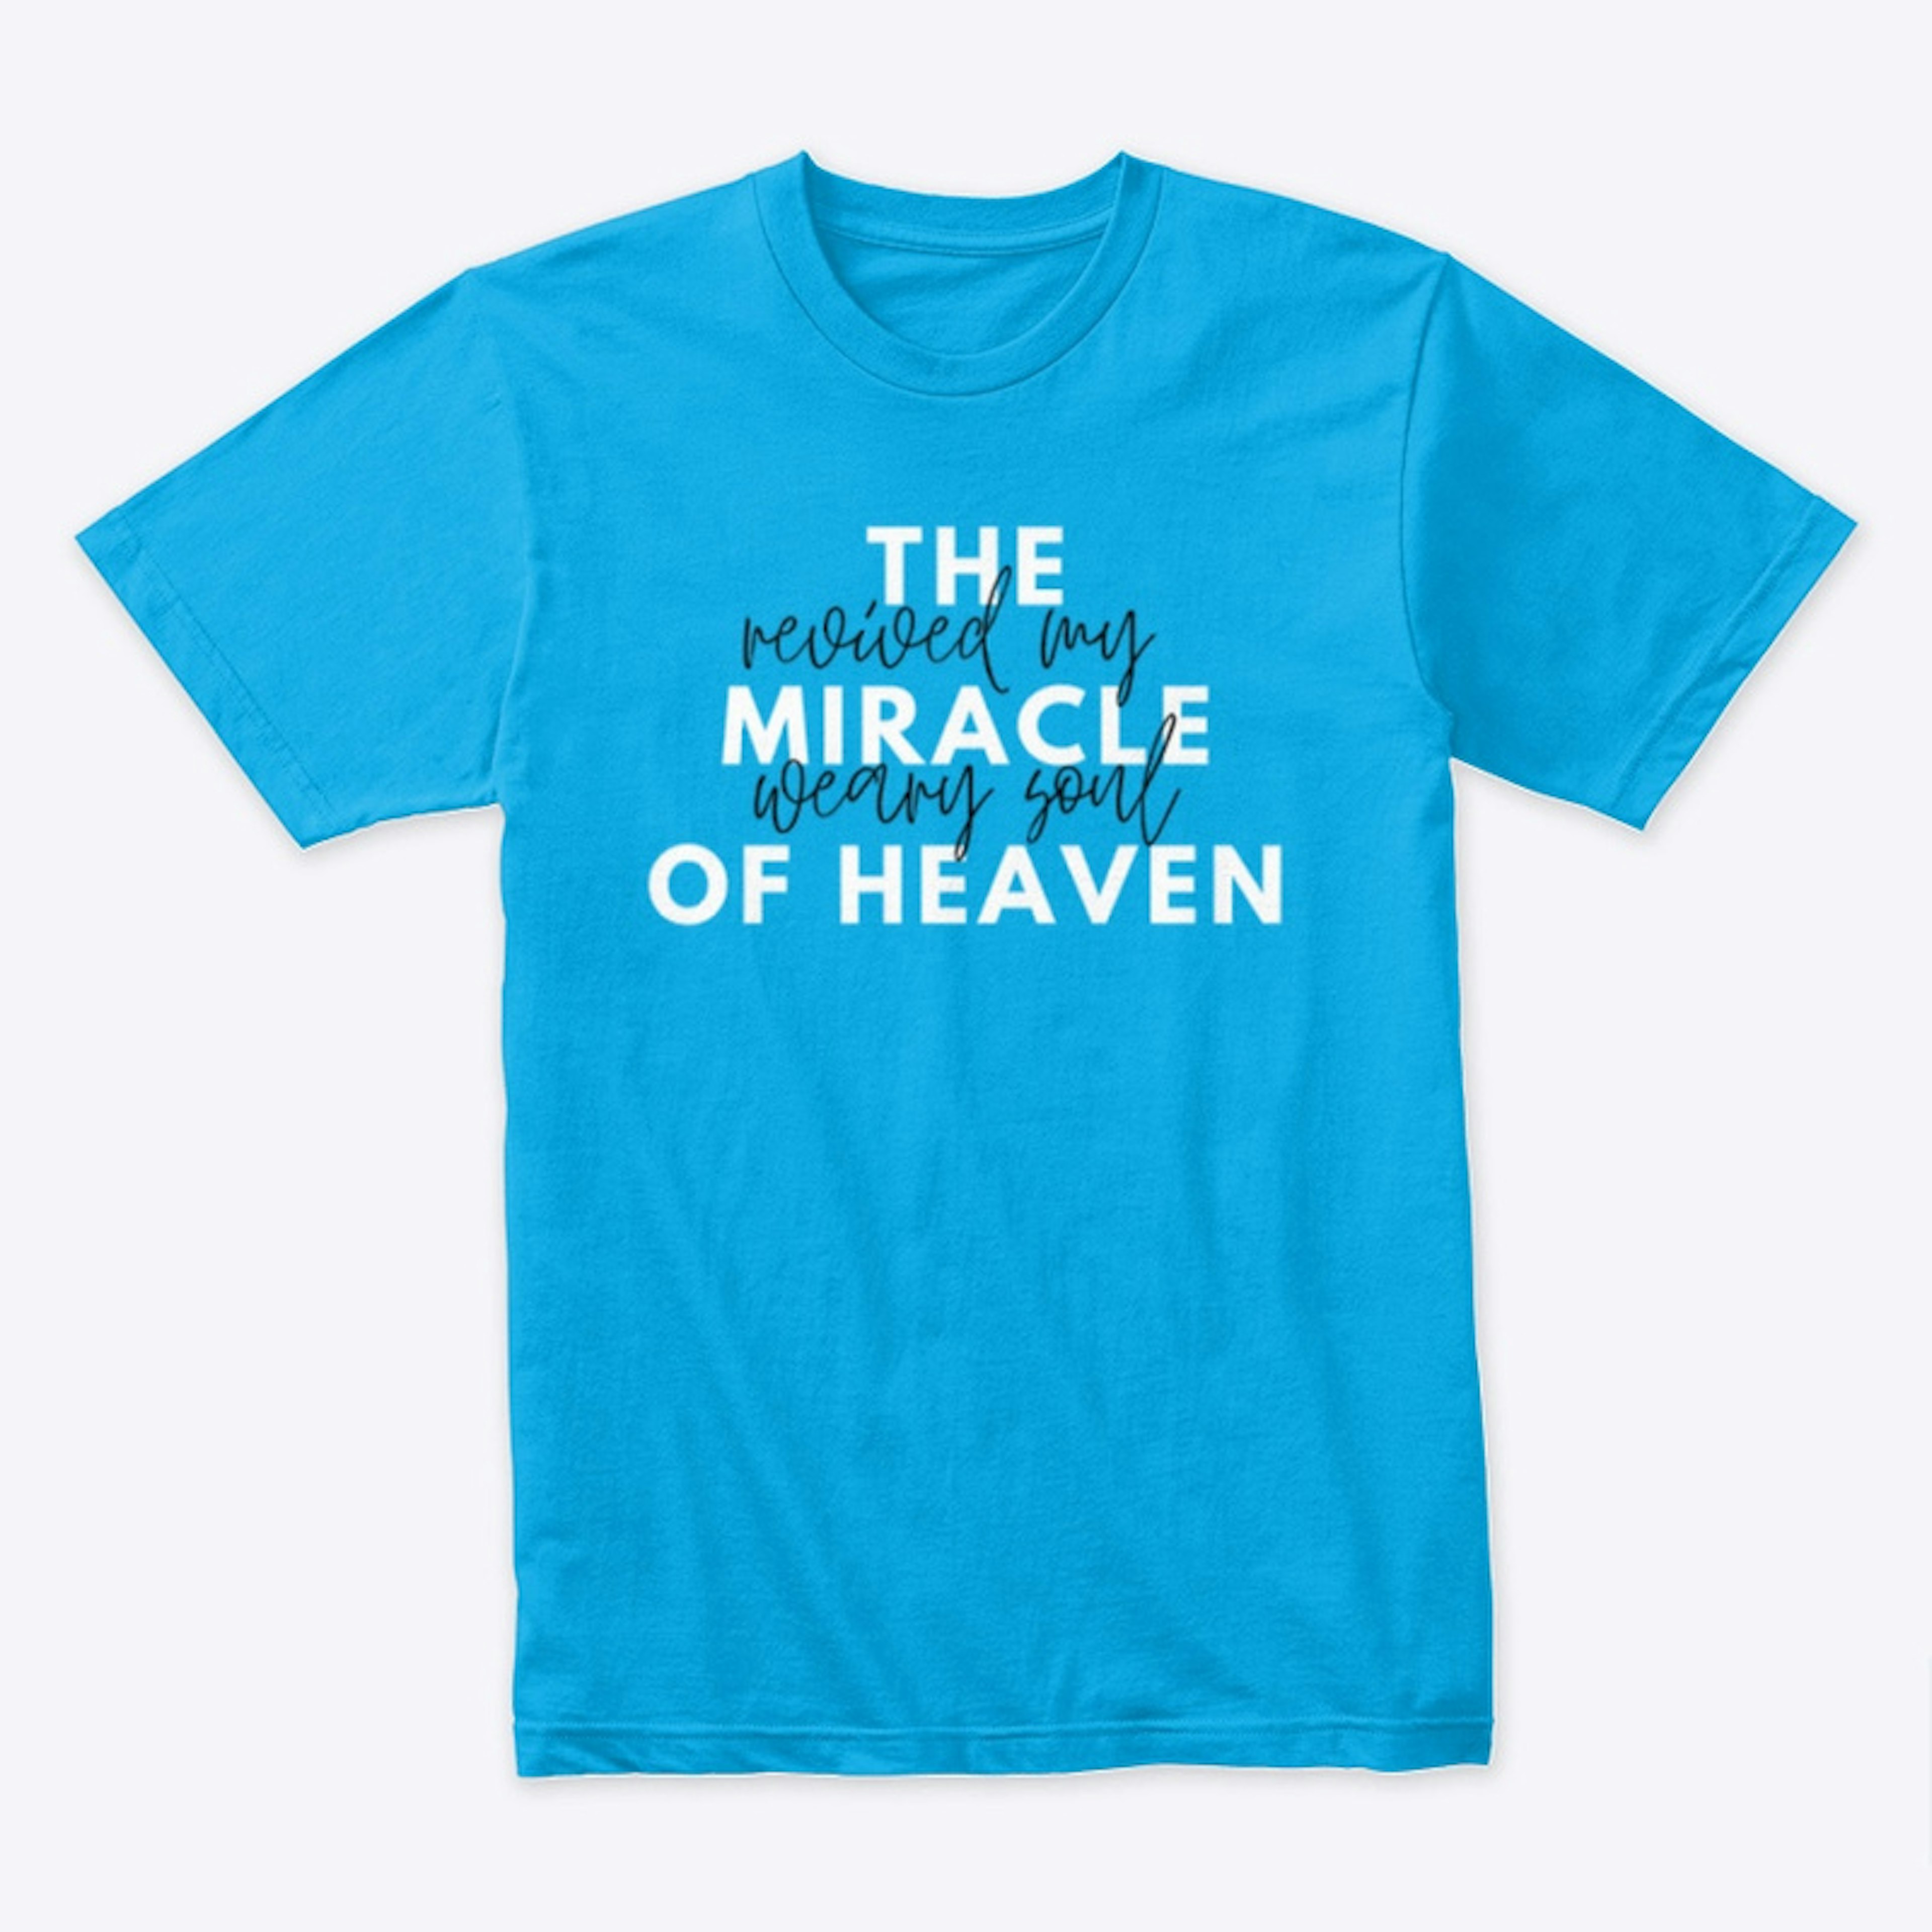 The Miracle of Heaven